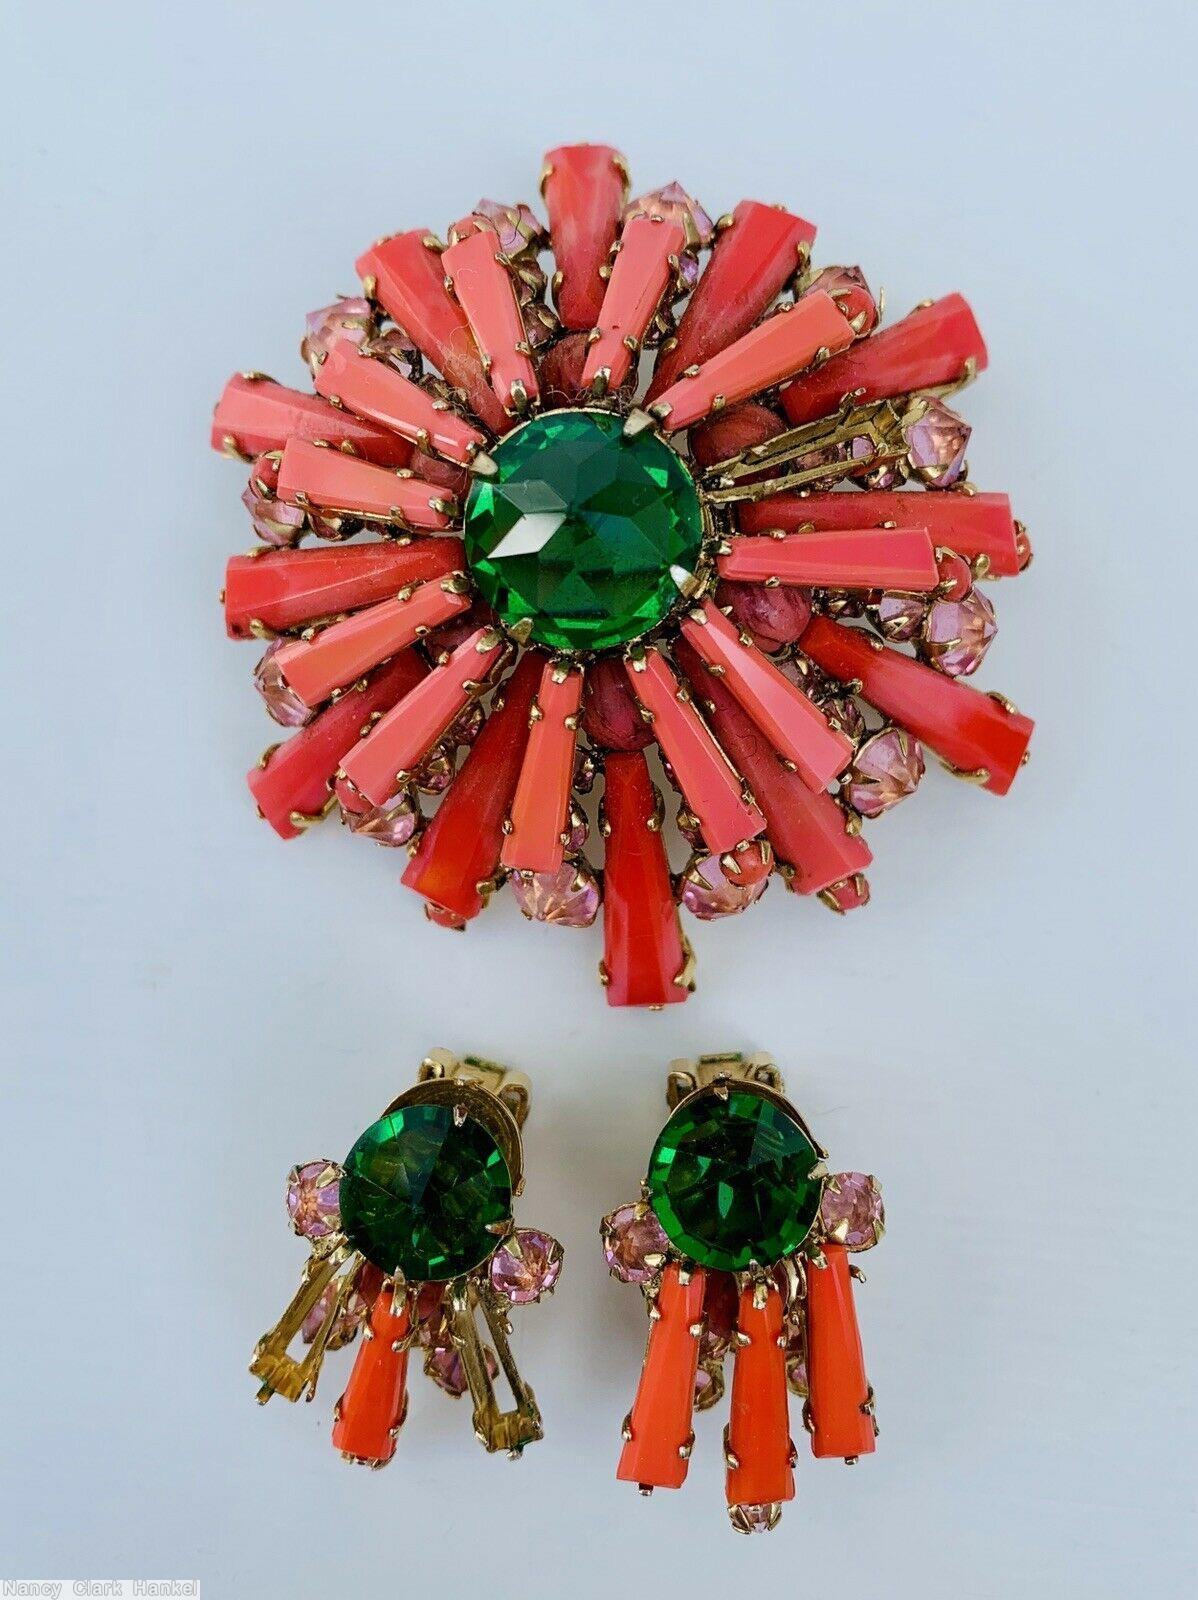 Schreiner 2 level domed radial round ruffle keystone pin top level 11 keystone large chaton center bottom level 12 keystone varied size chaton coral keystone goldtone pink inverted stone emerald faceted large chaton center jewelry